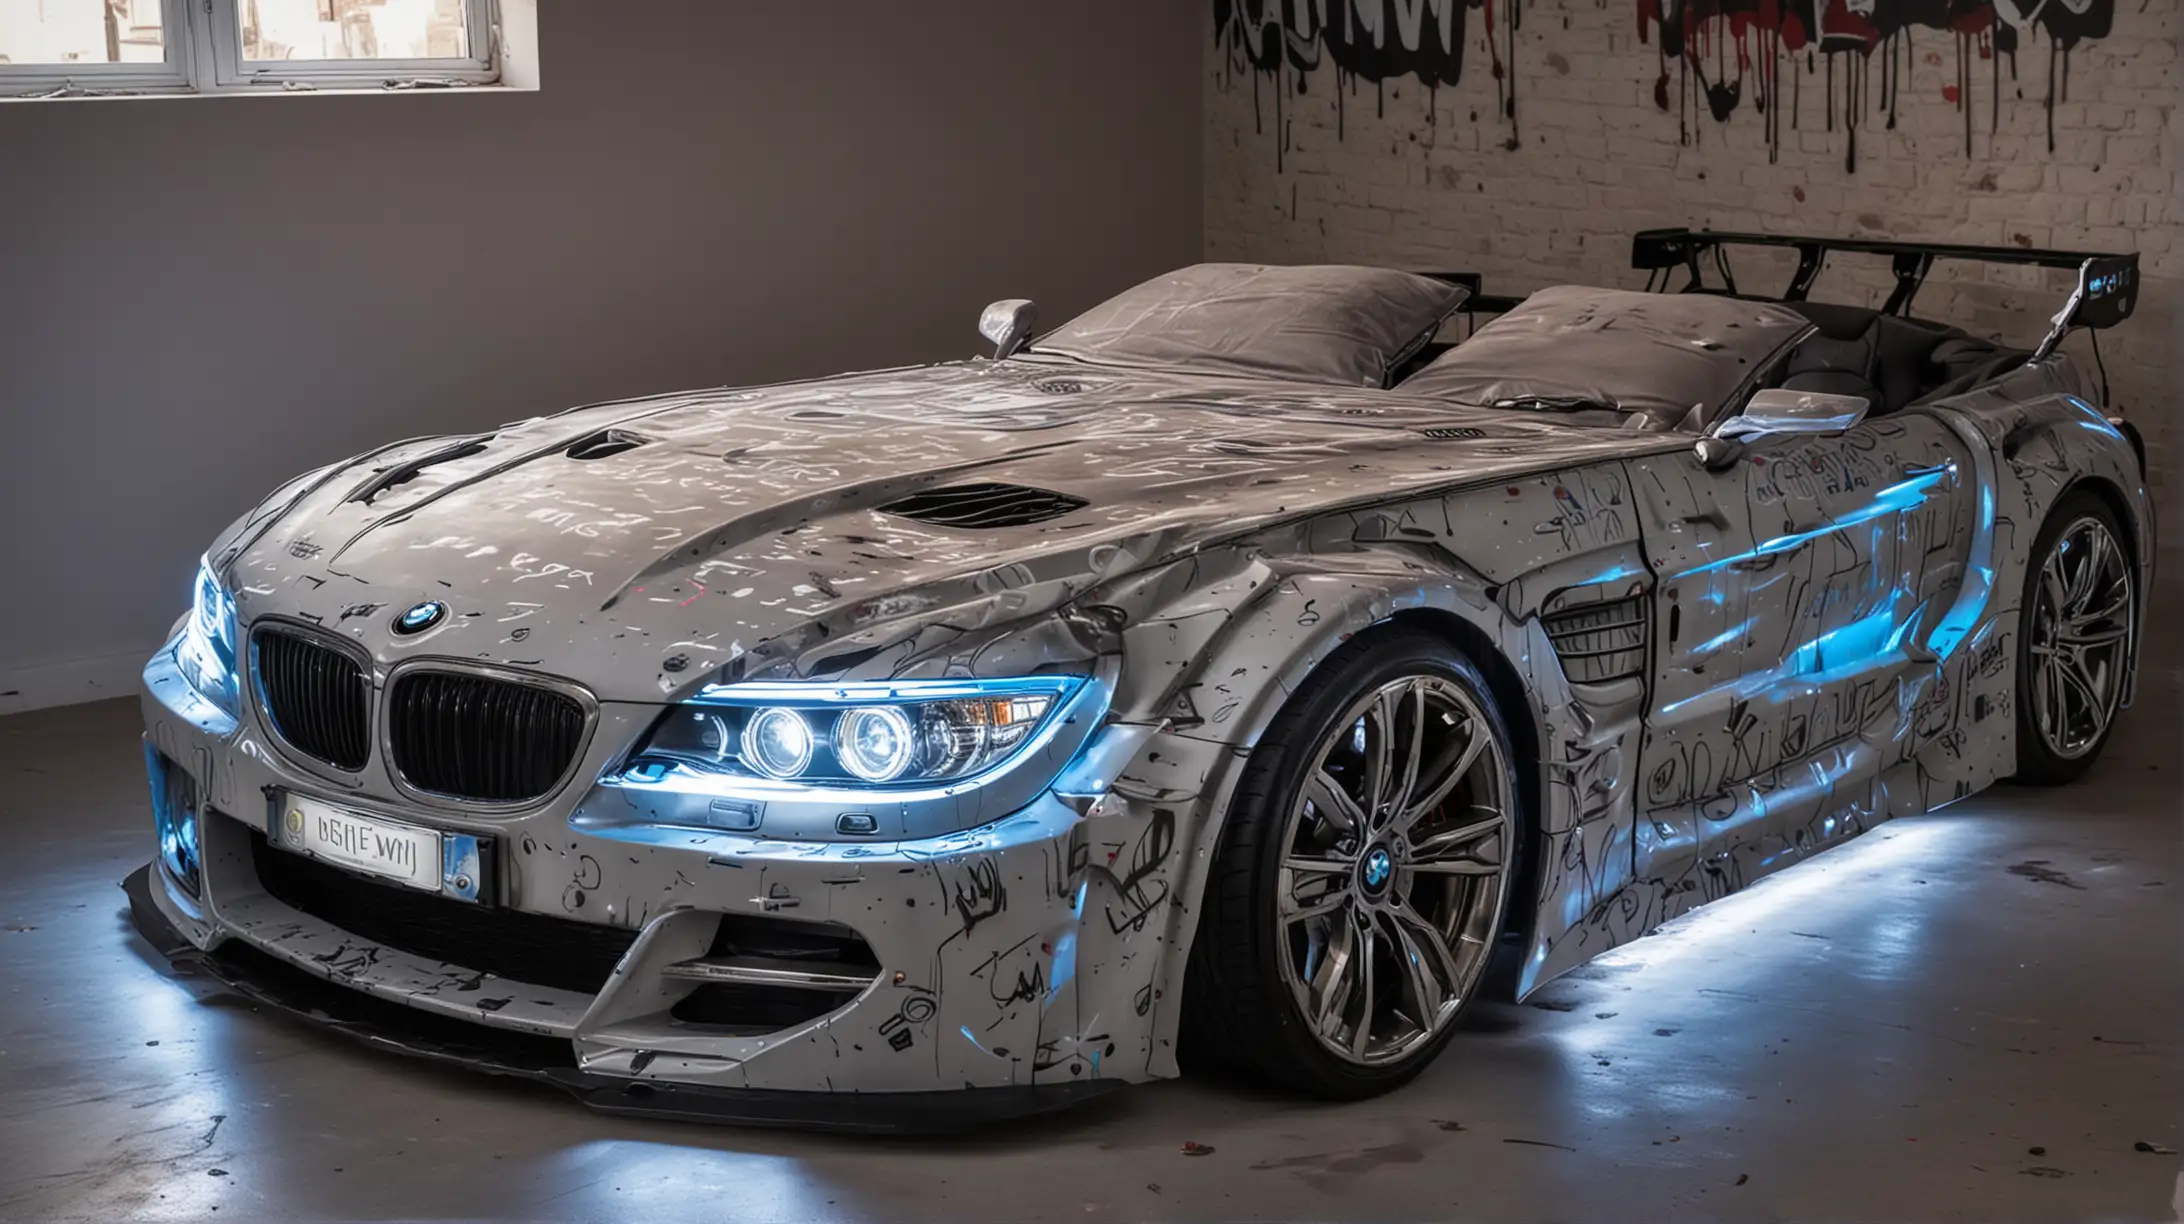 BMW CarShaped Double Bed with RGB Graffiti and Illuminated Headlights